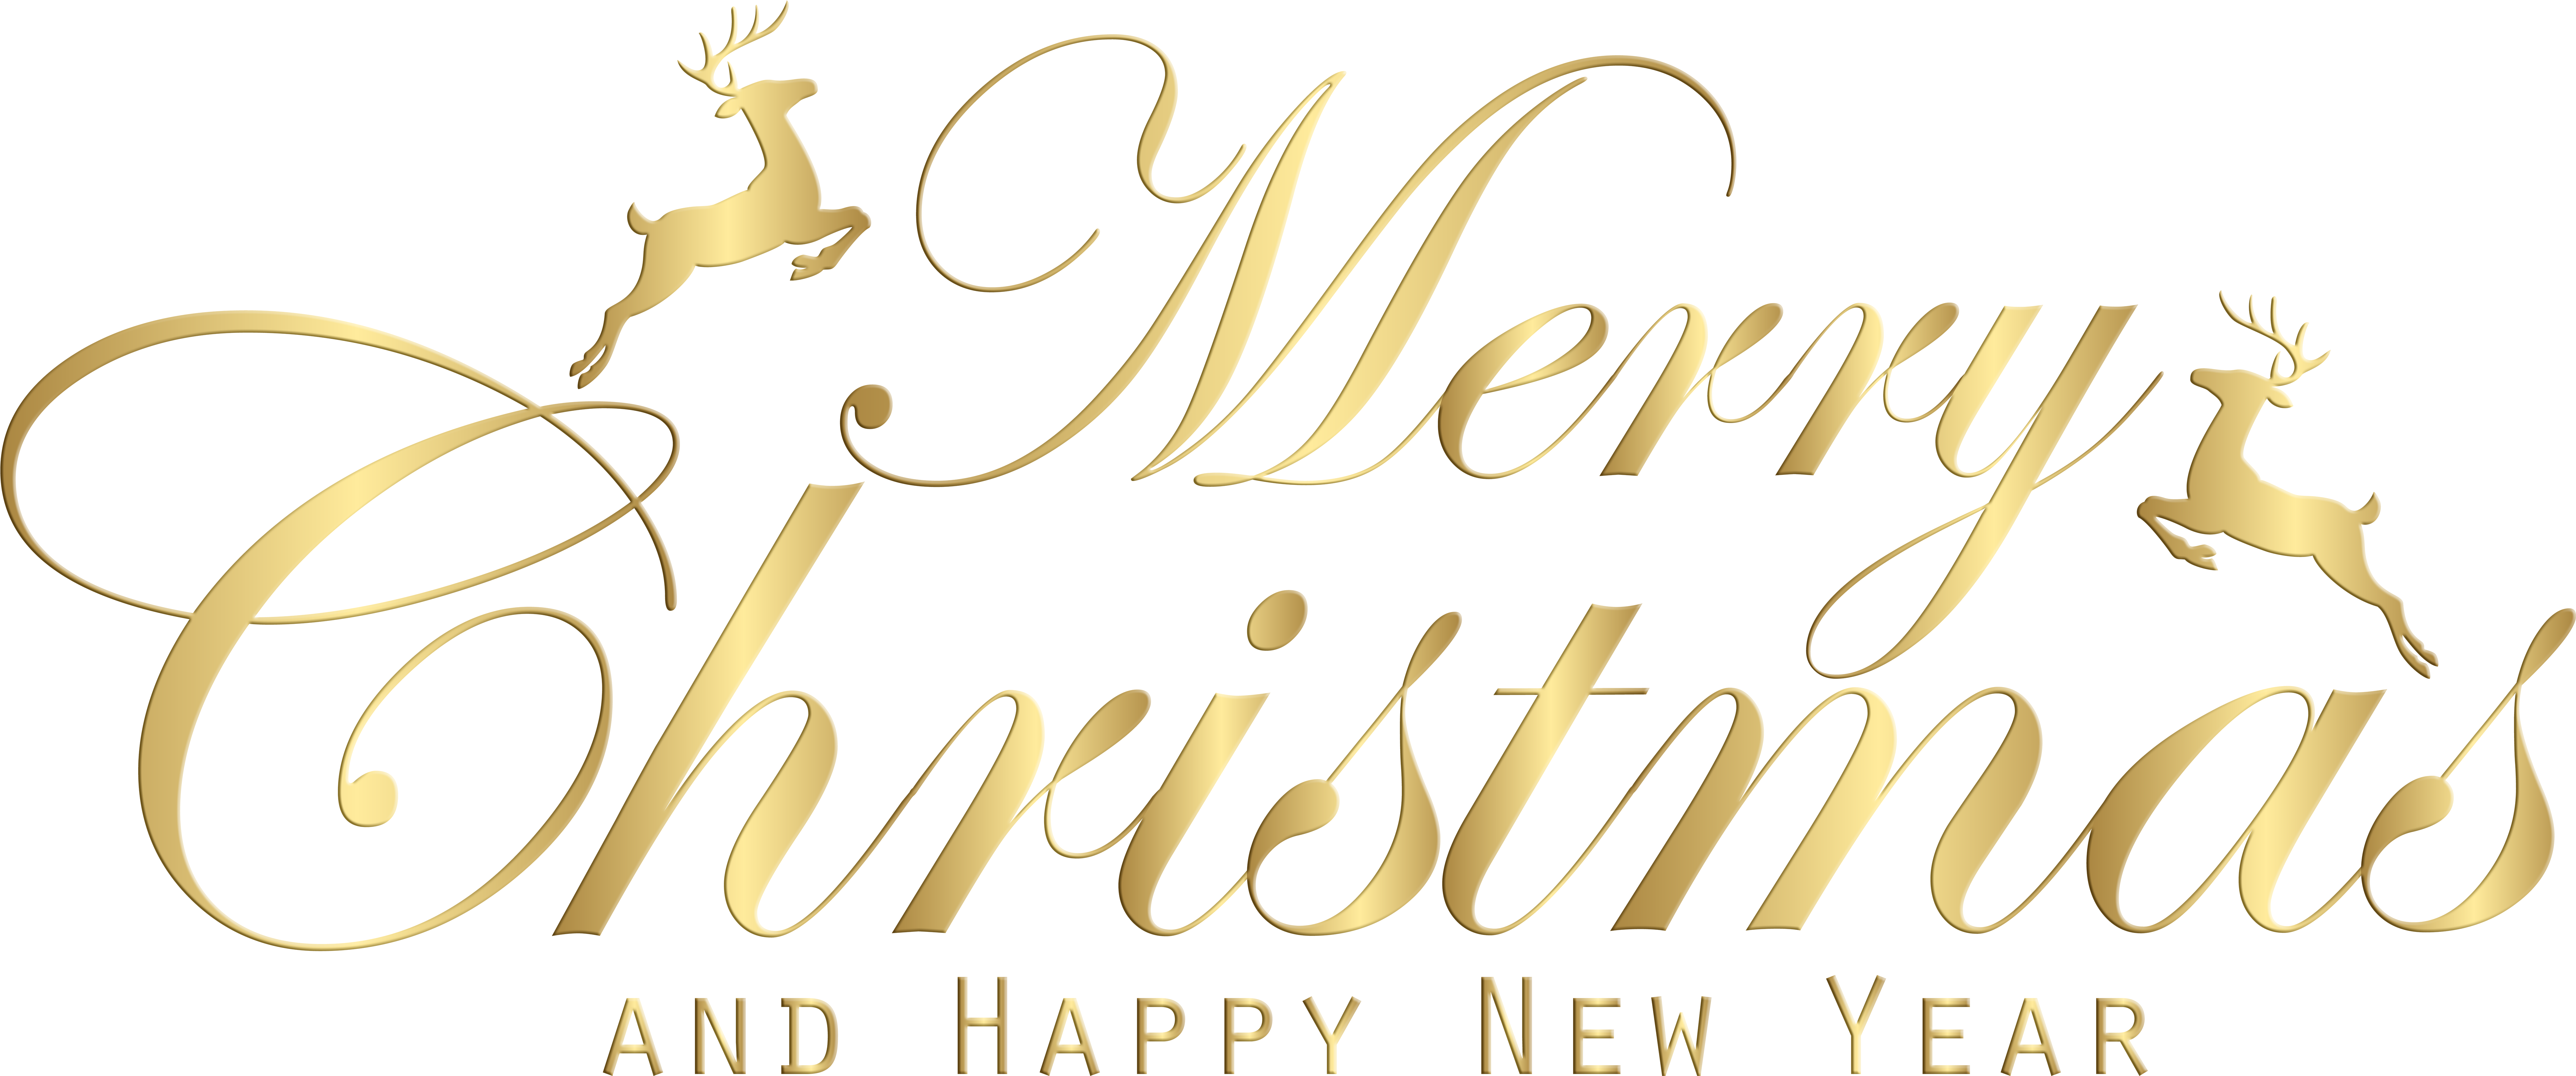 Golden Merry Christmasand Happy New Year Text